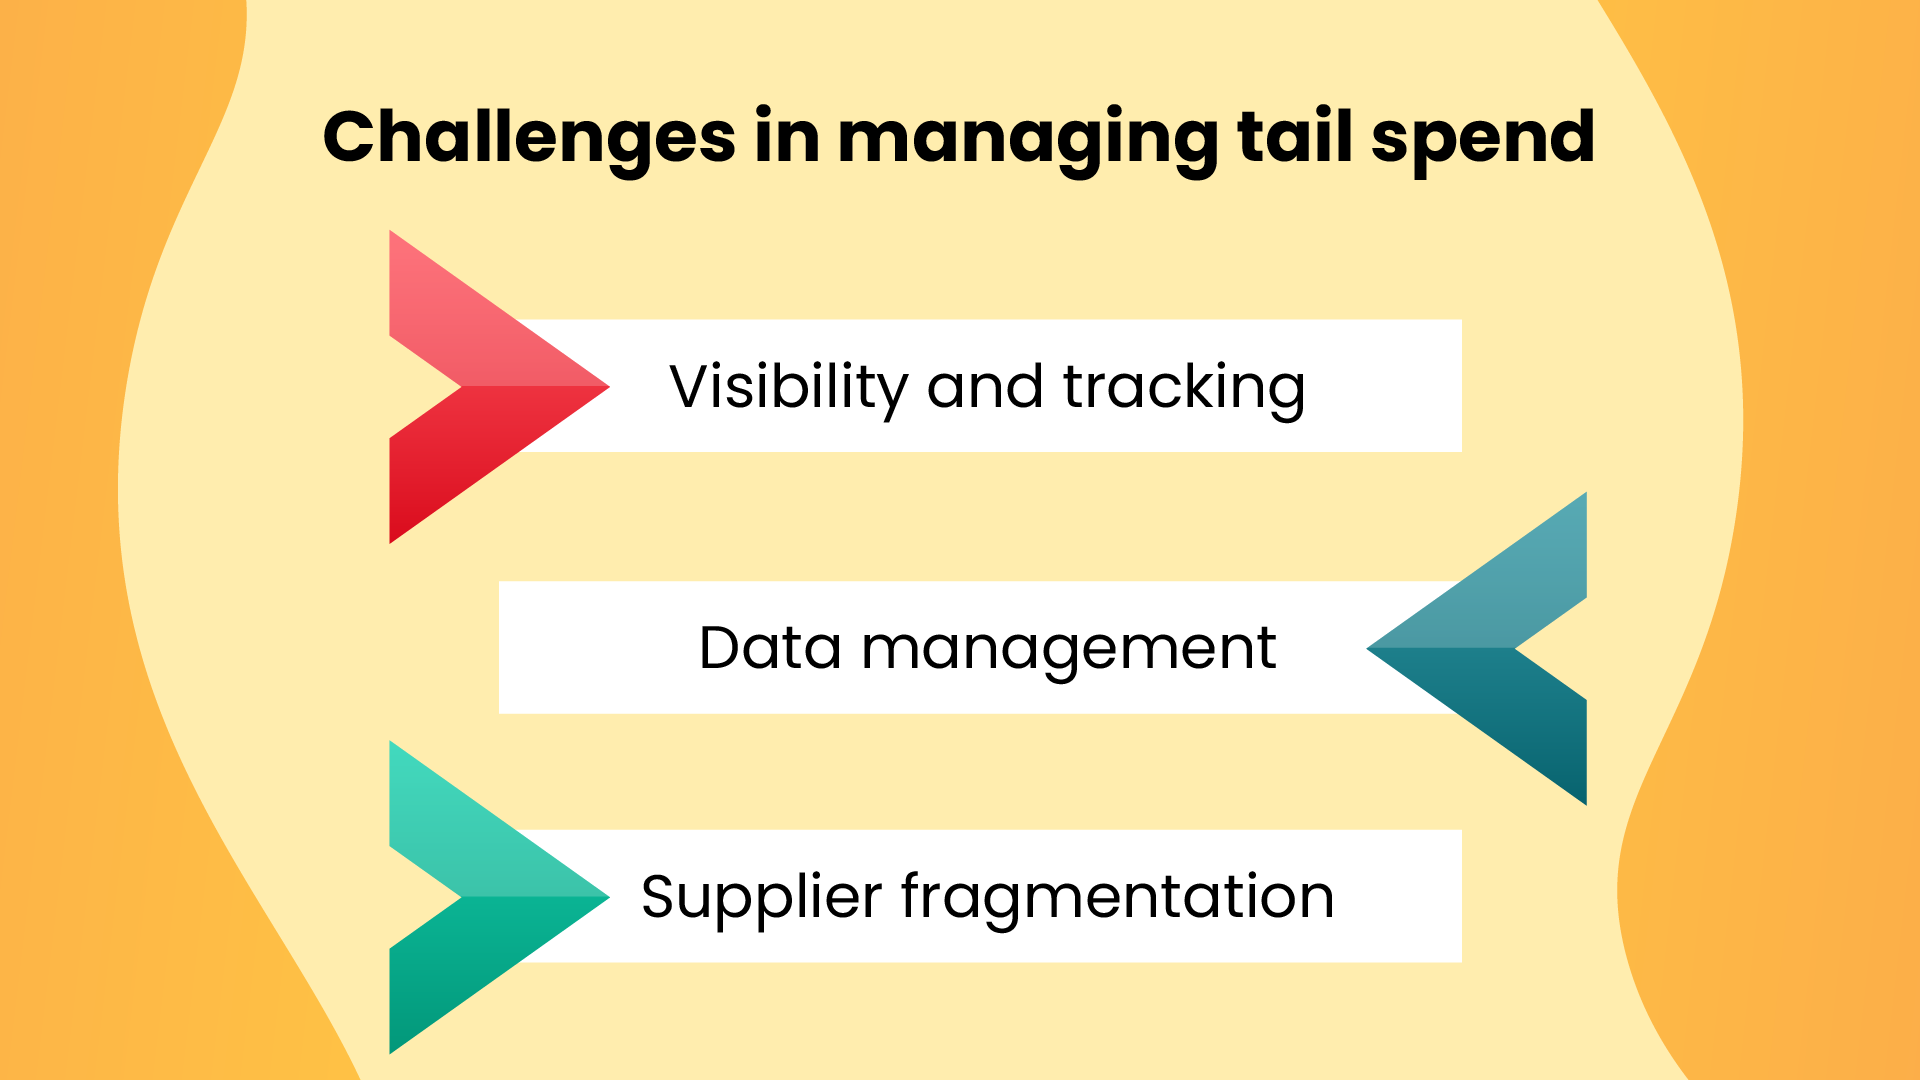 Challenges in managing tail spend